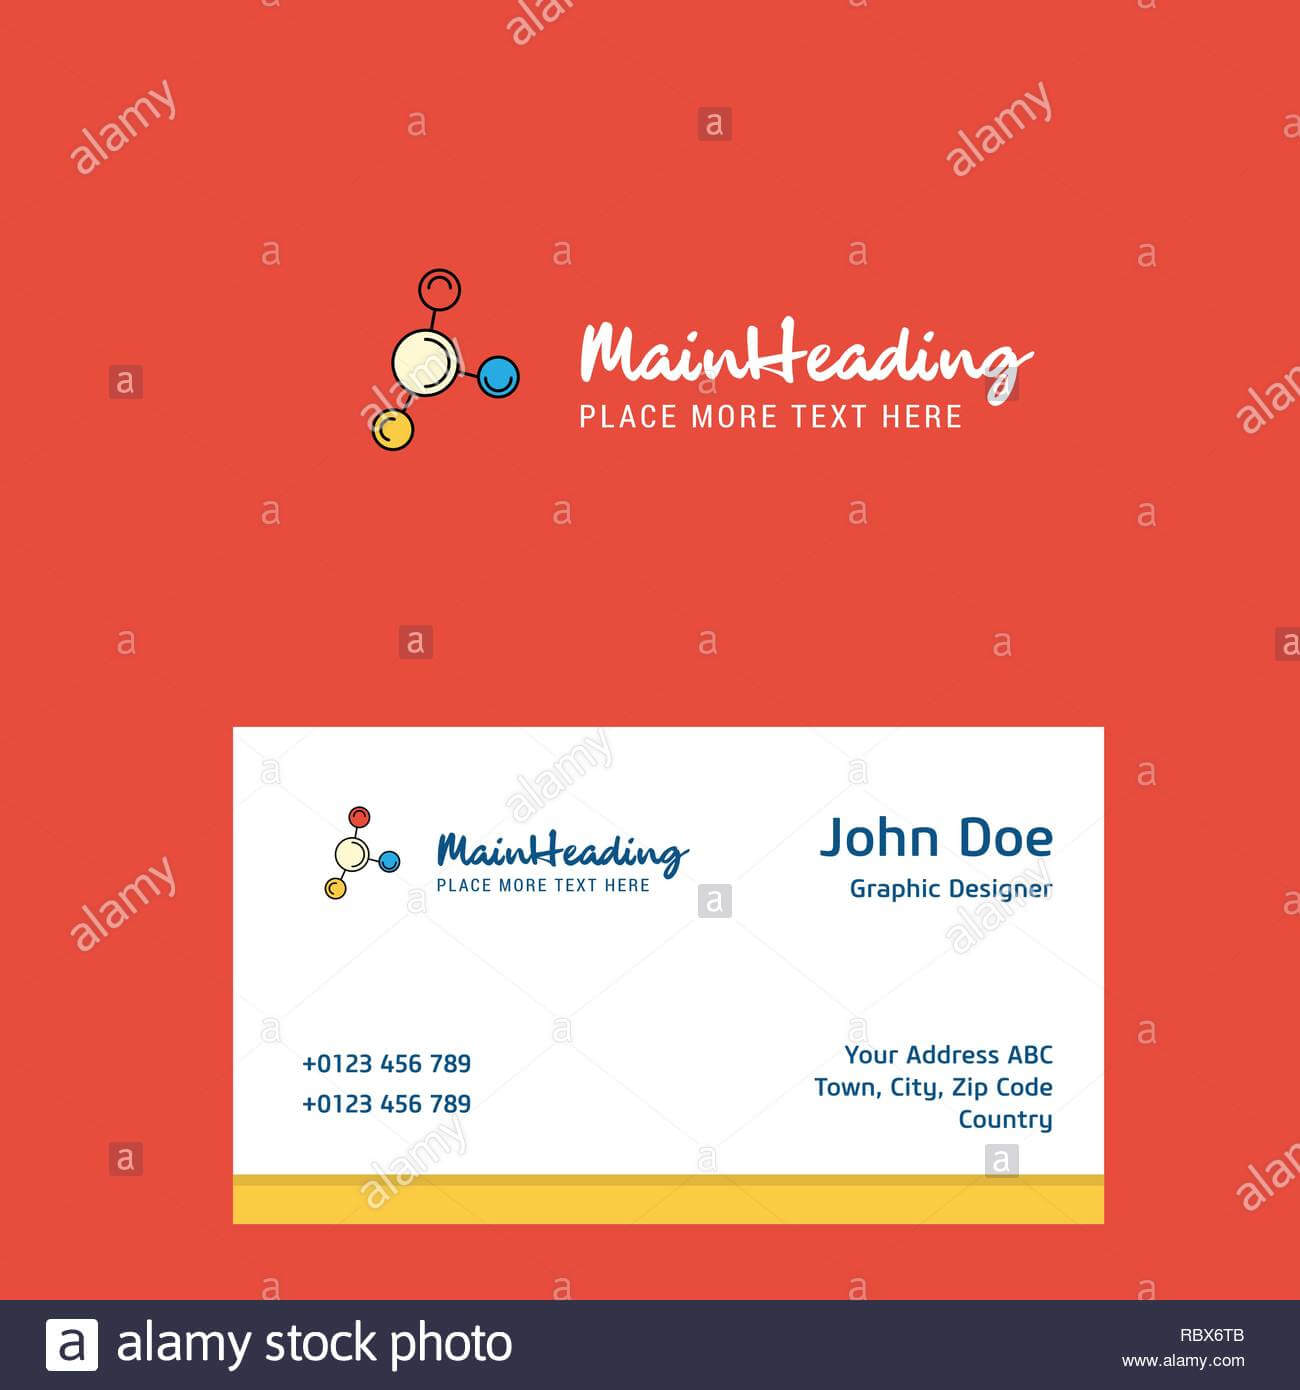 Networking Logo Design With Business Card Template. Elegant Pertaining To Networking Card Template